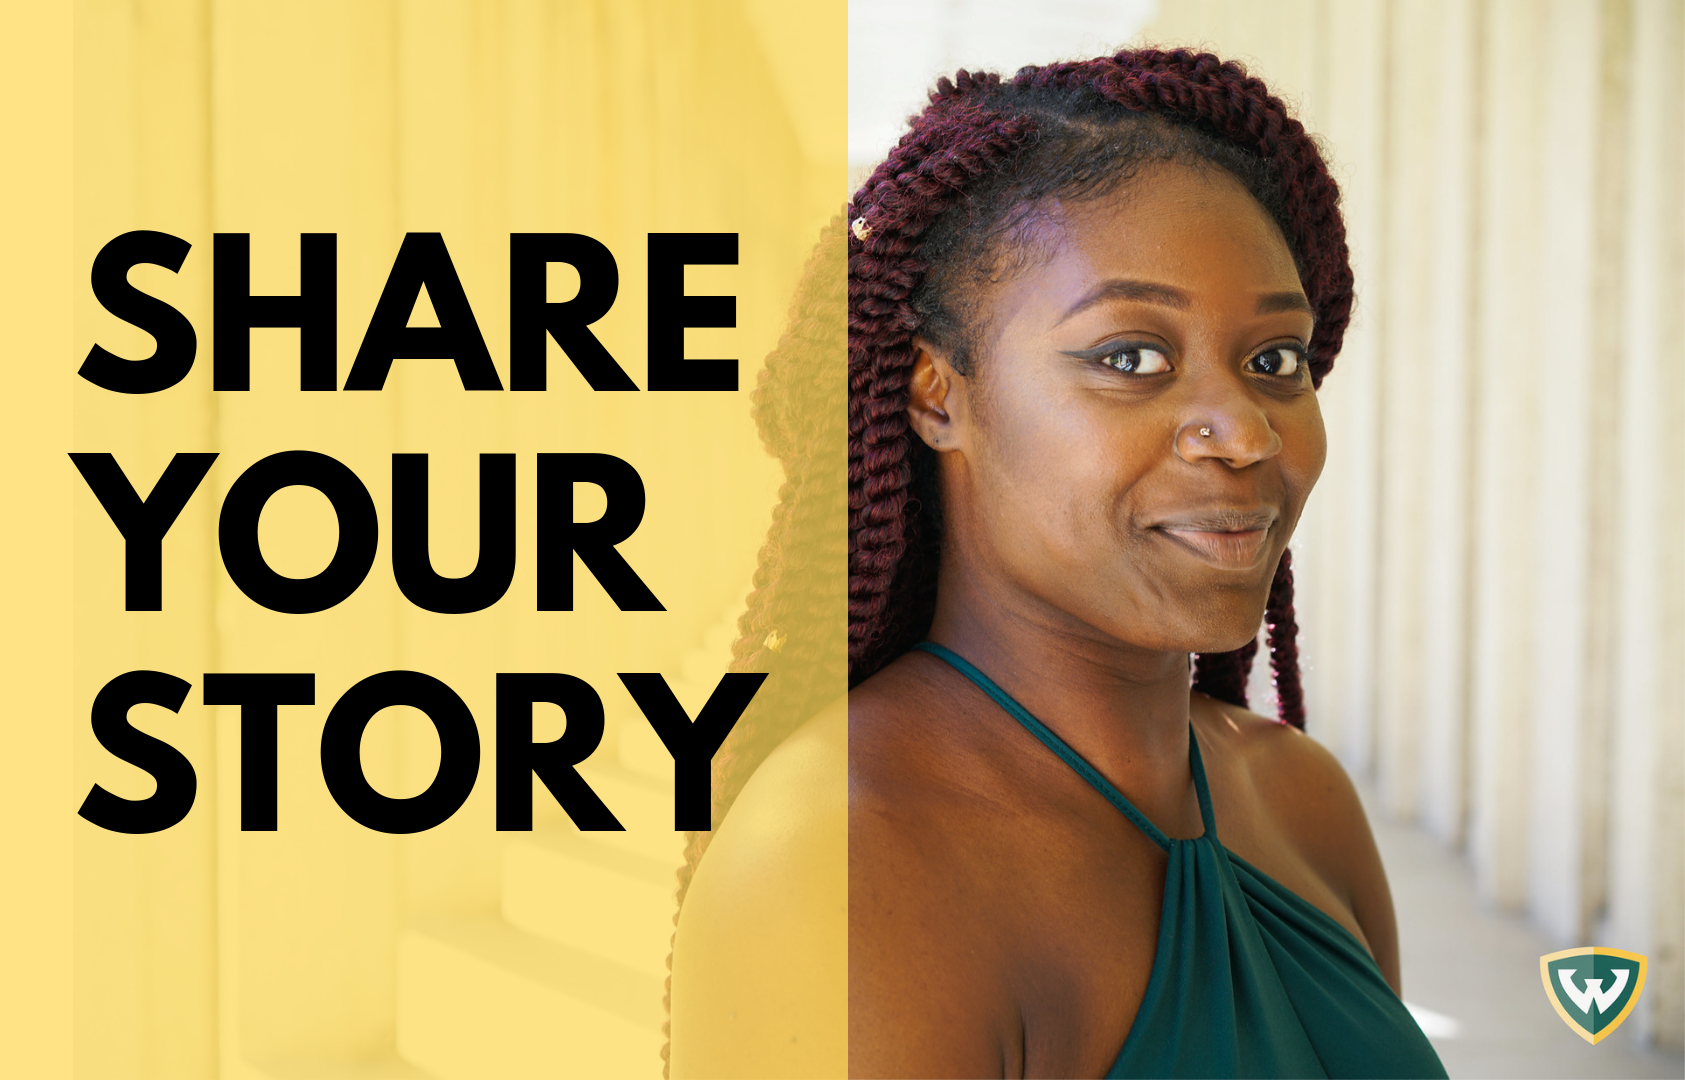 Share your story 